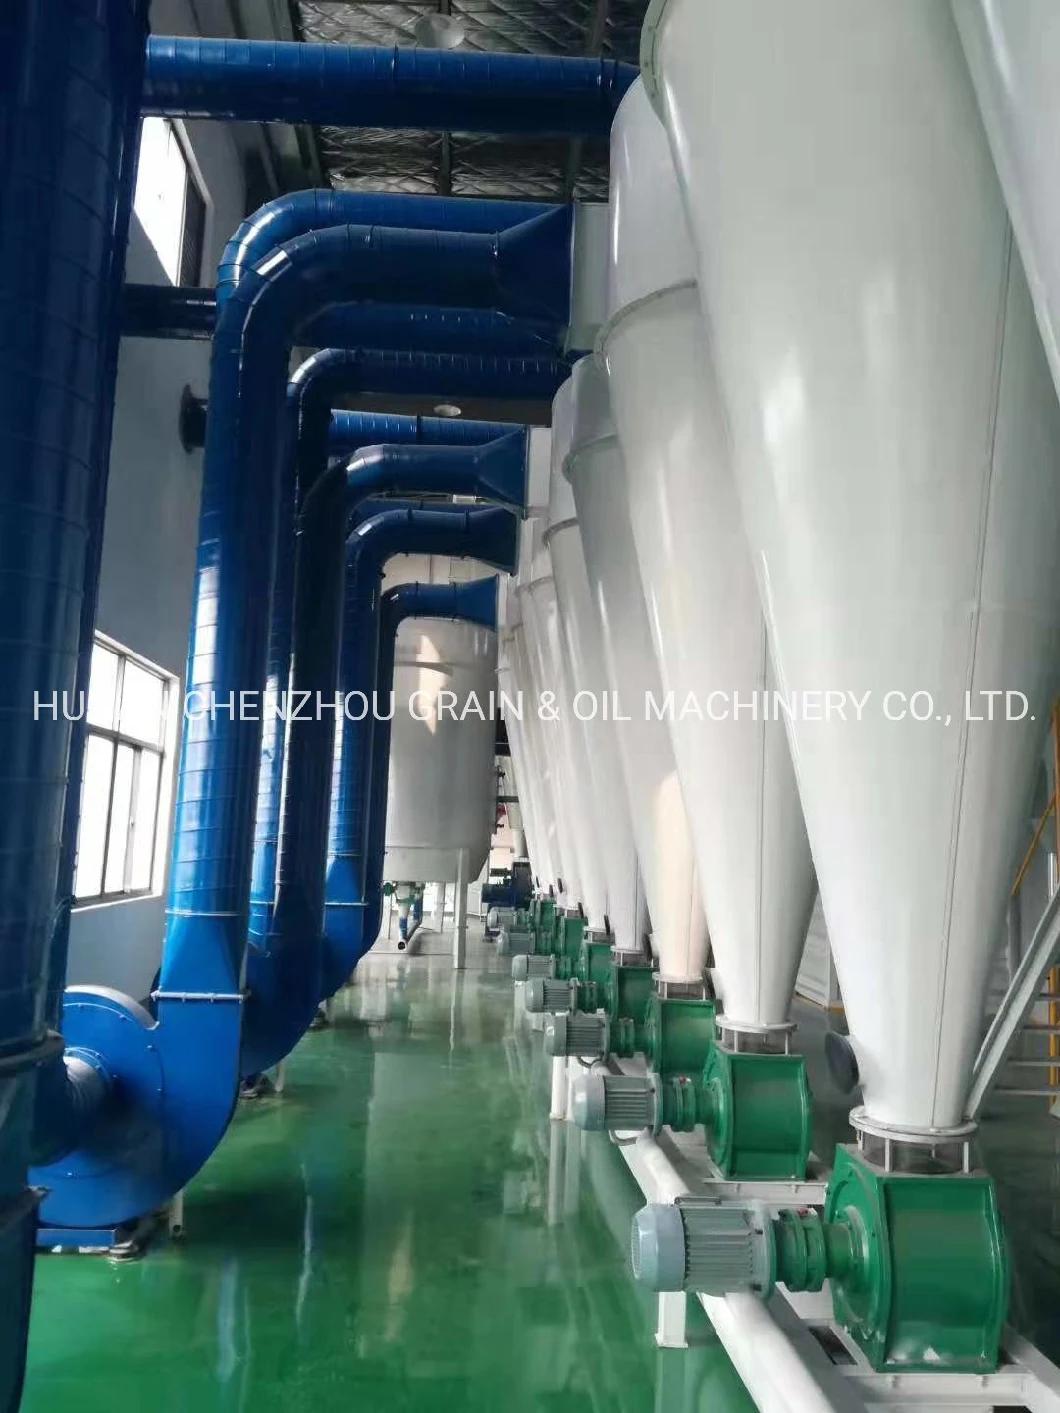 5tph Turn Key Complete Set Parboiled Rice Mill Machine Non-Parboiled and Aromatic Rice Mill Bangladesh Clj Brand